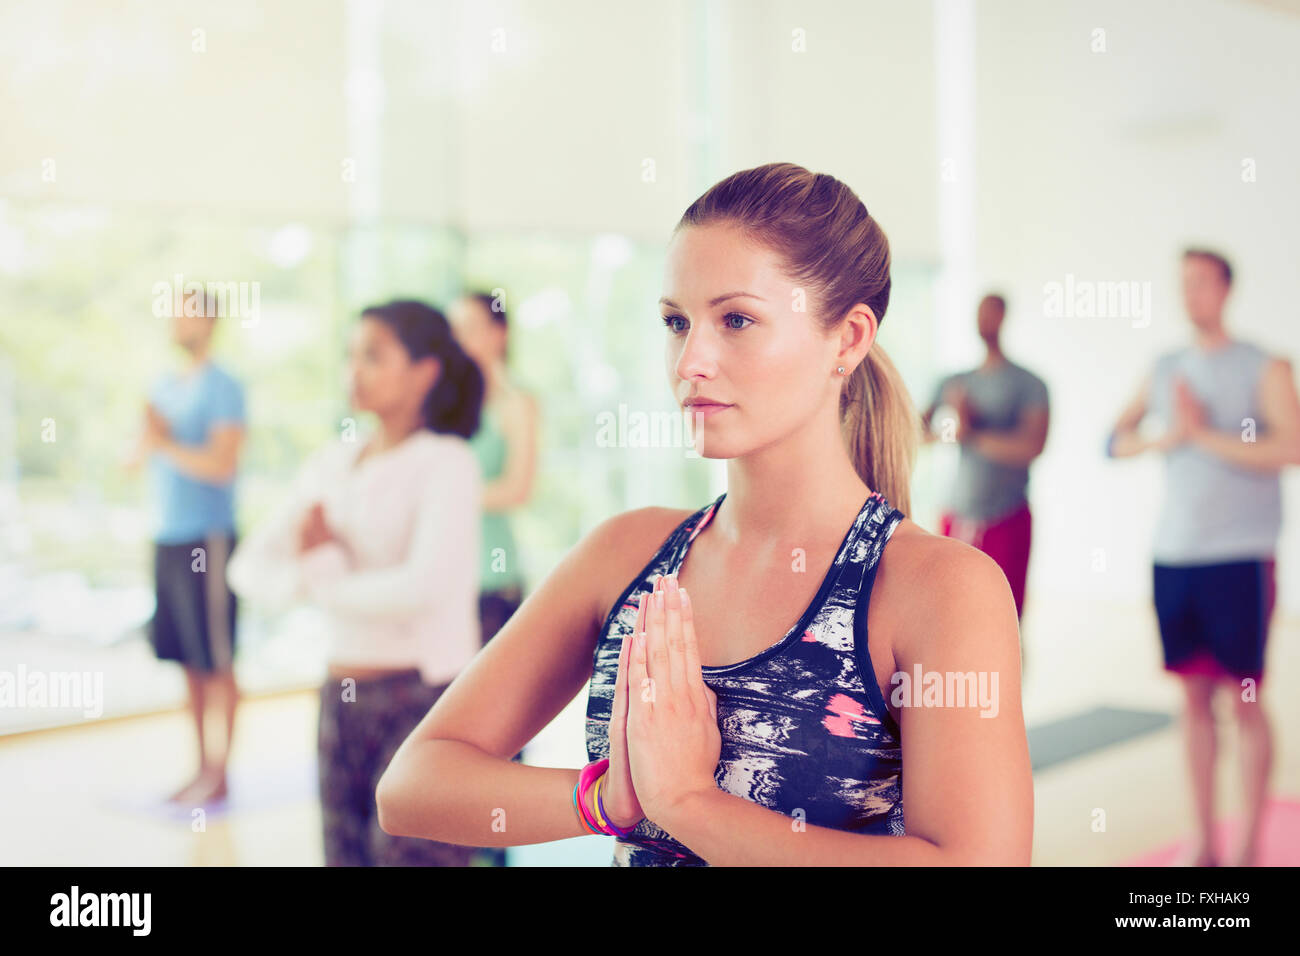 Focused woman with hands at prayer position in yoga class Stock Photo